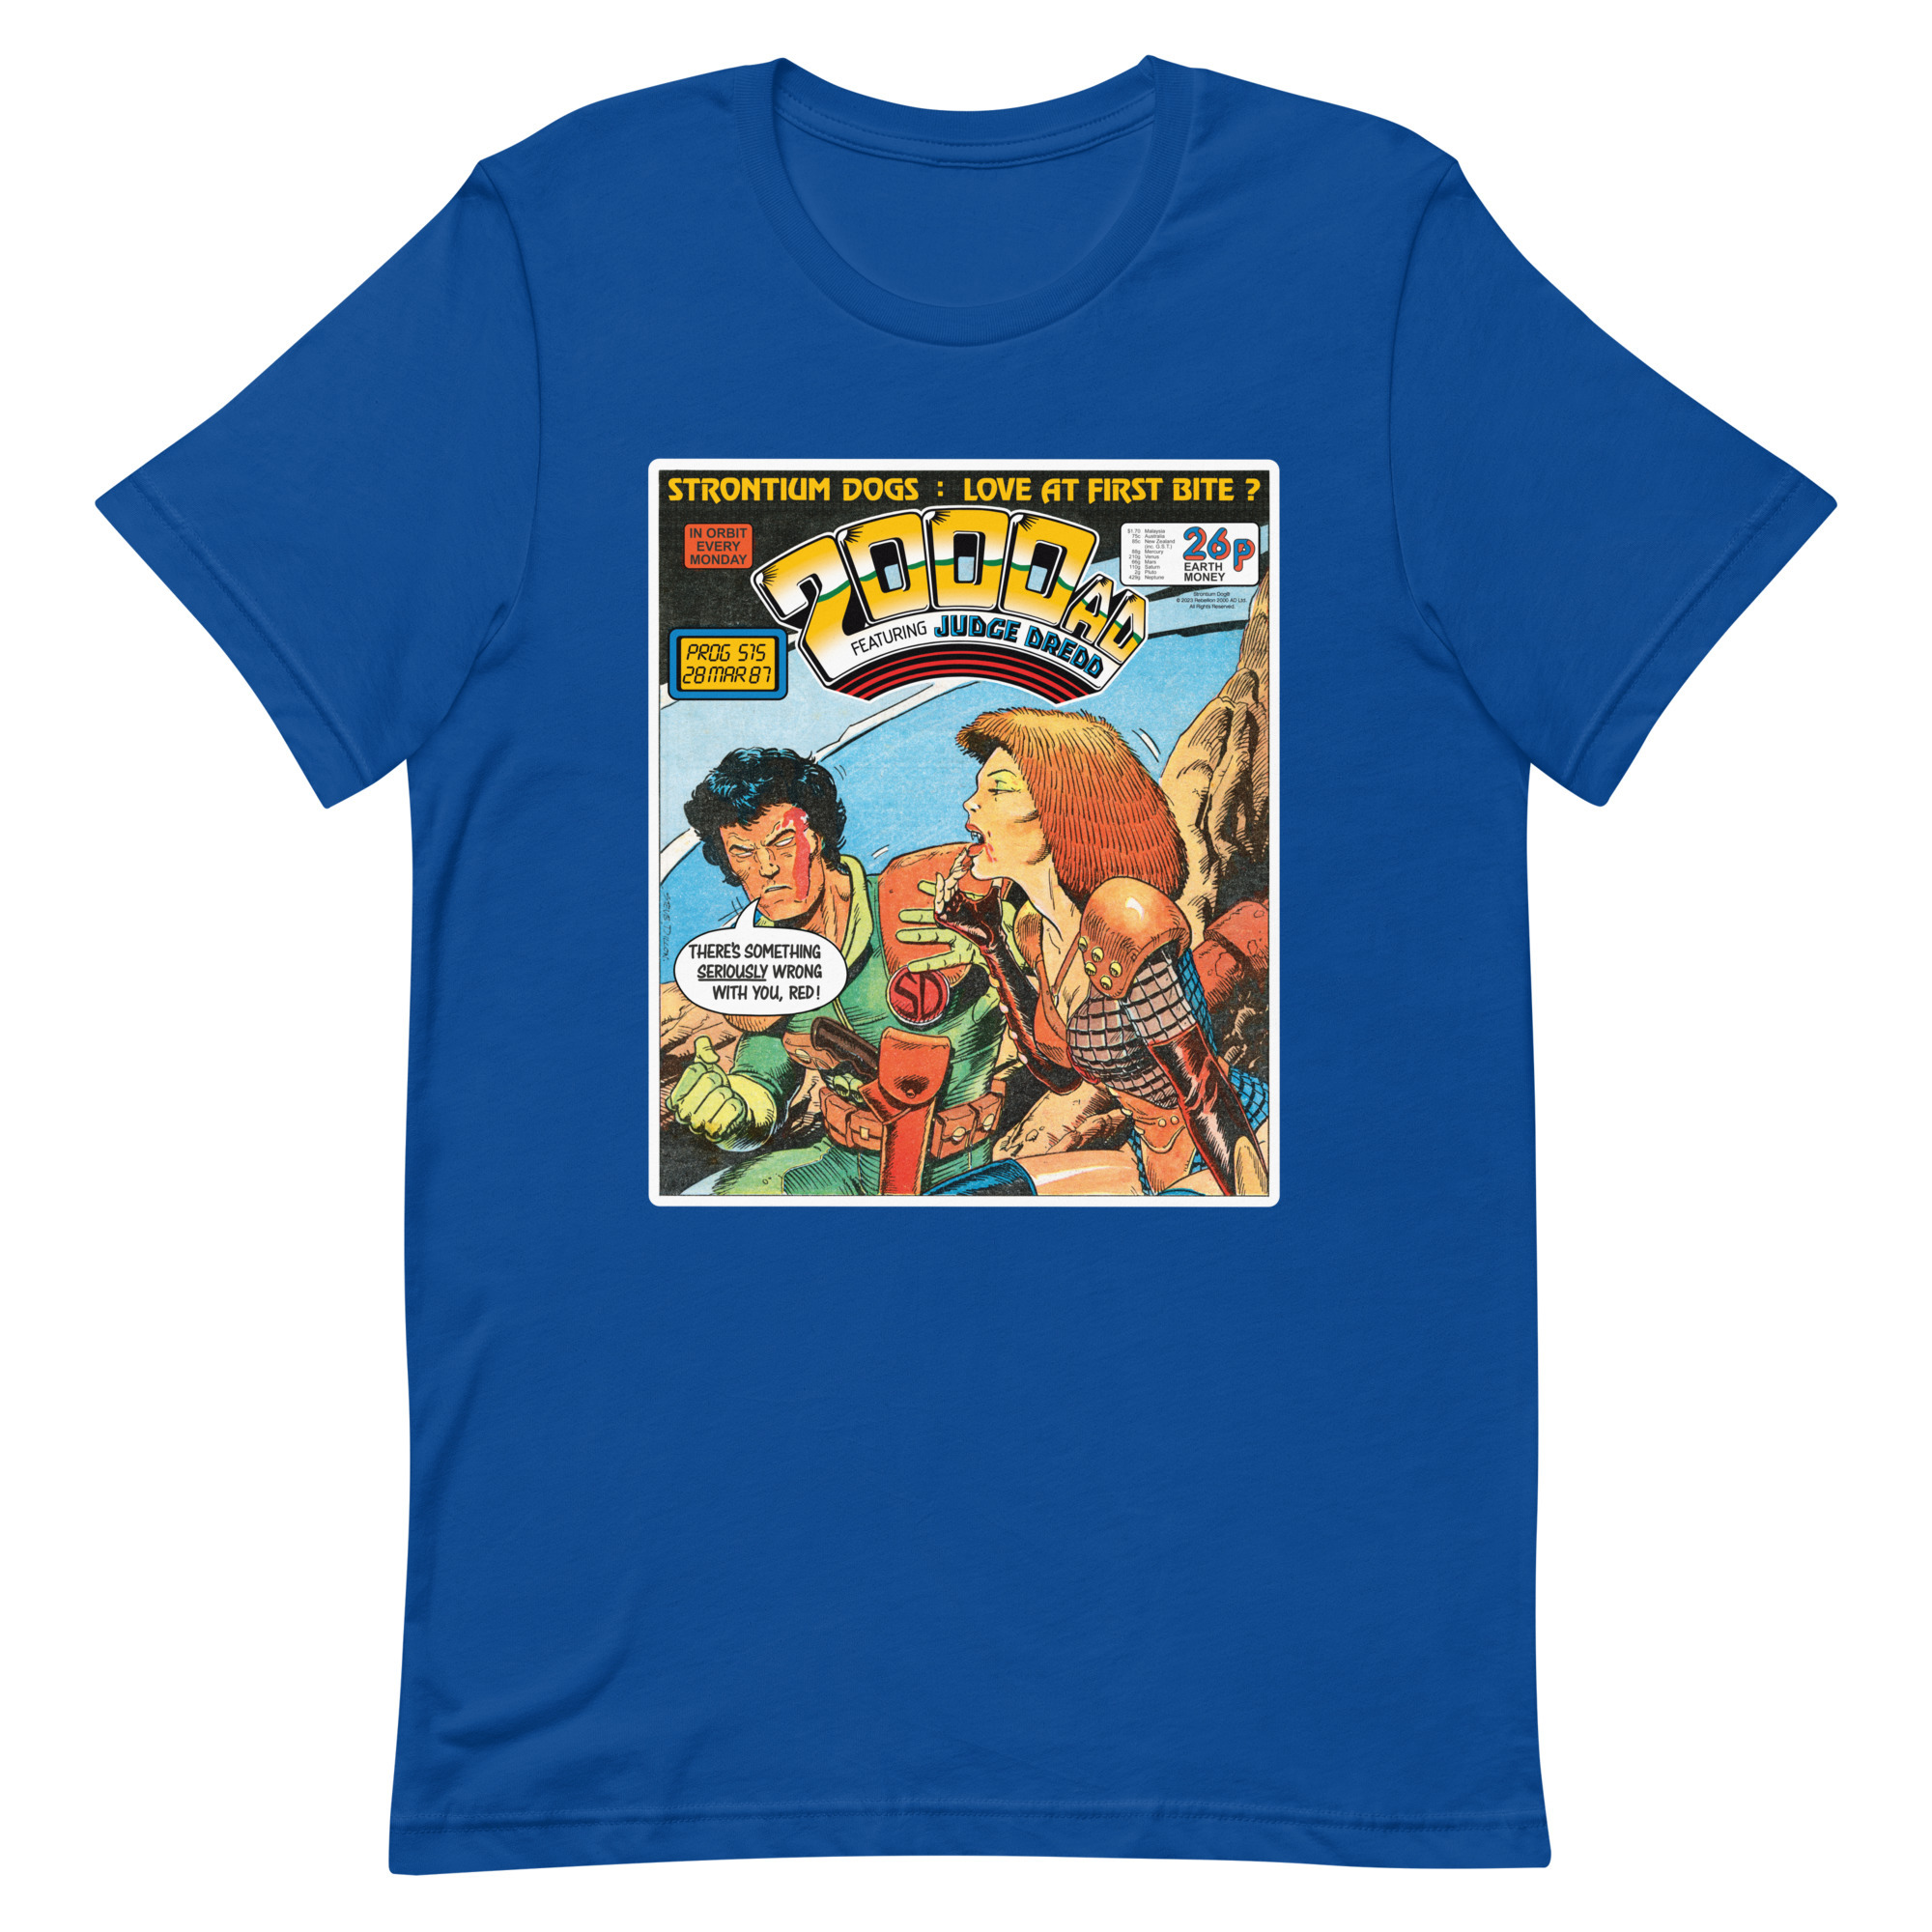 Royal Blue Tshirt with a 'Classic' 2000 AD Cover image on the chest. In the image Strontium Dog judges Durham Reds.... appetites (For Blood)